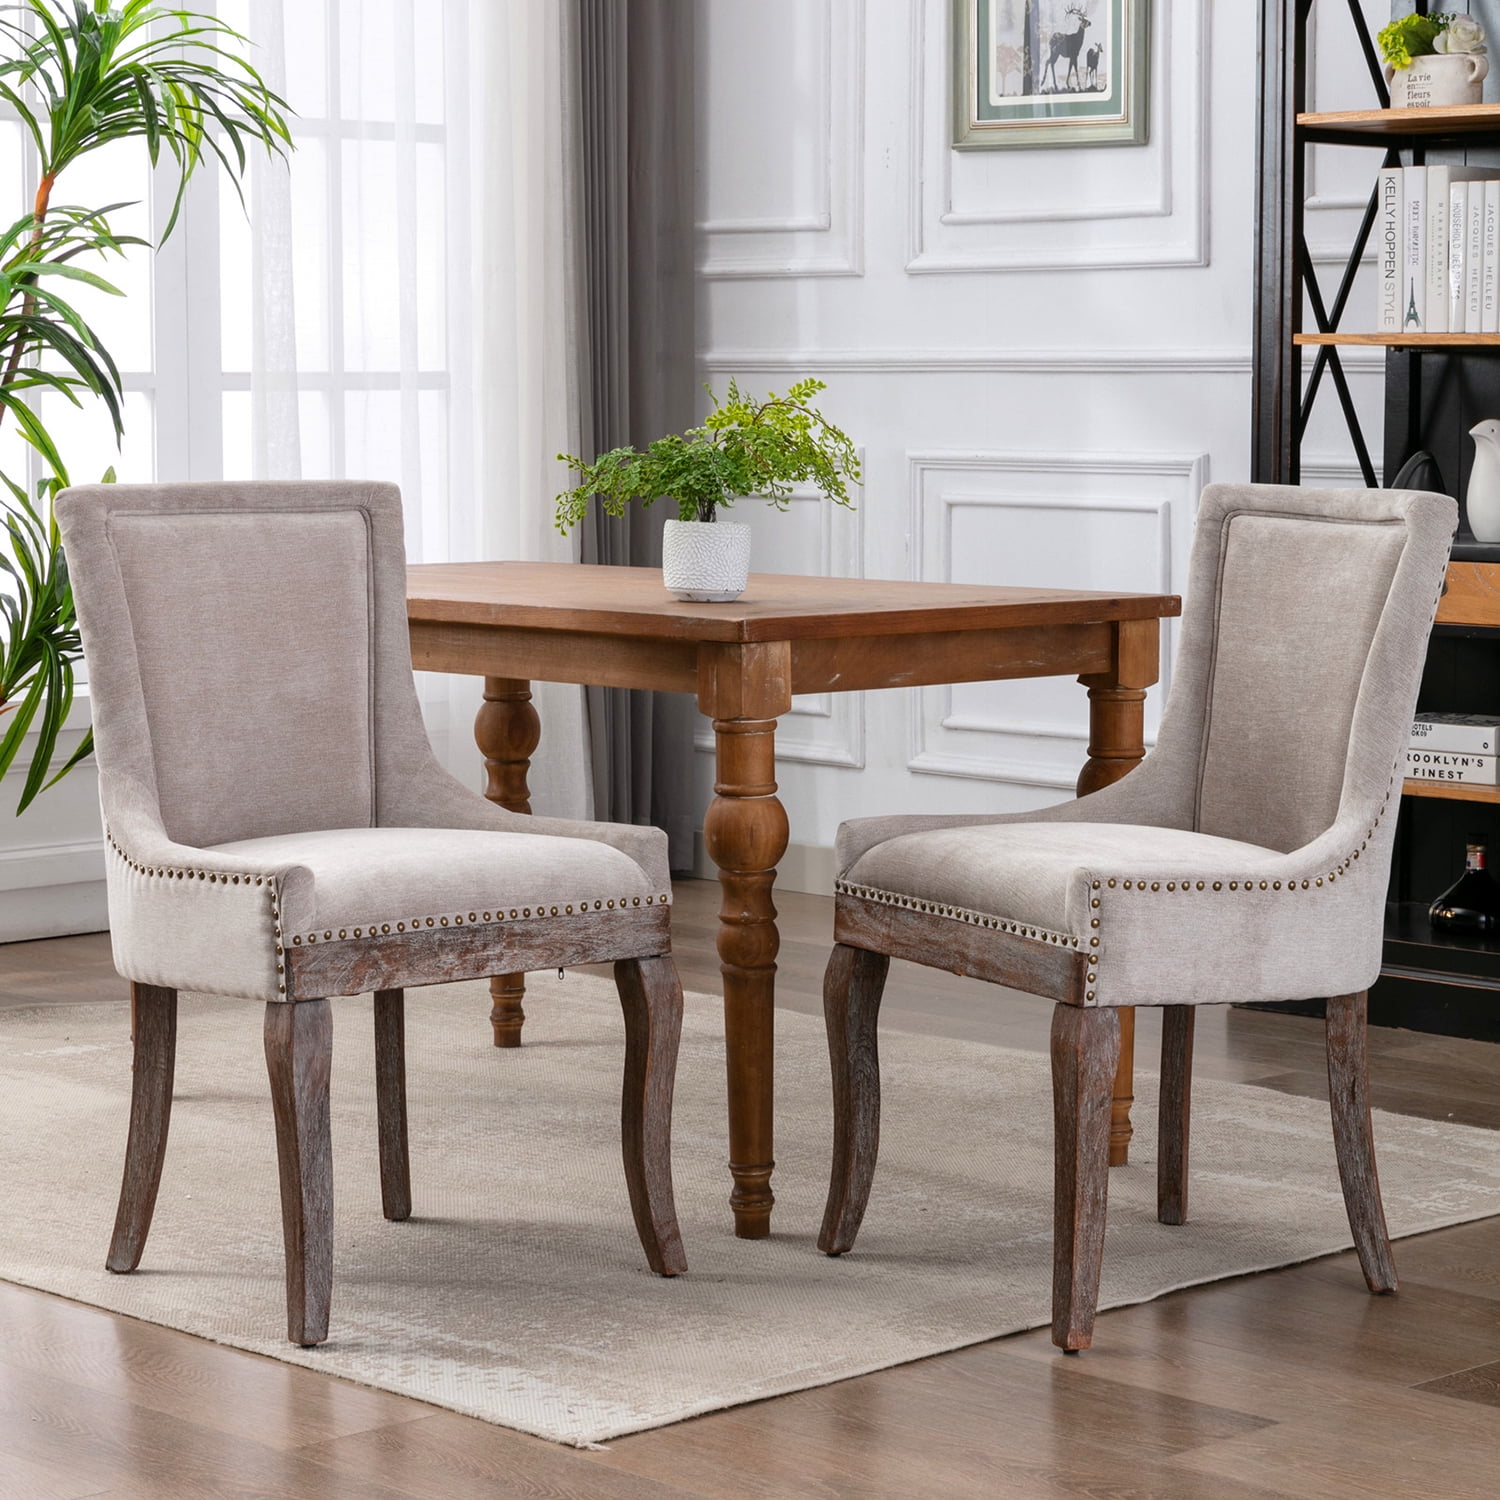 Eve Fabric Curved Dining Chair in Light Beige Cotton and Solid Ash Wood  Legs - Furniture World